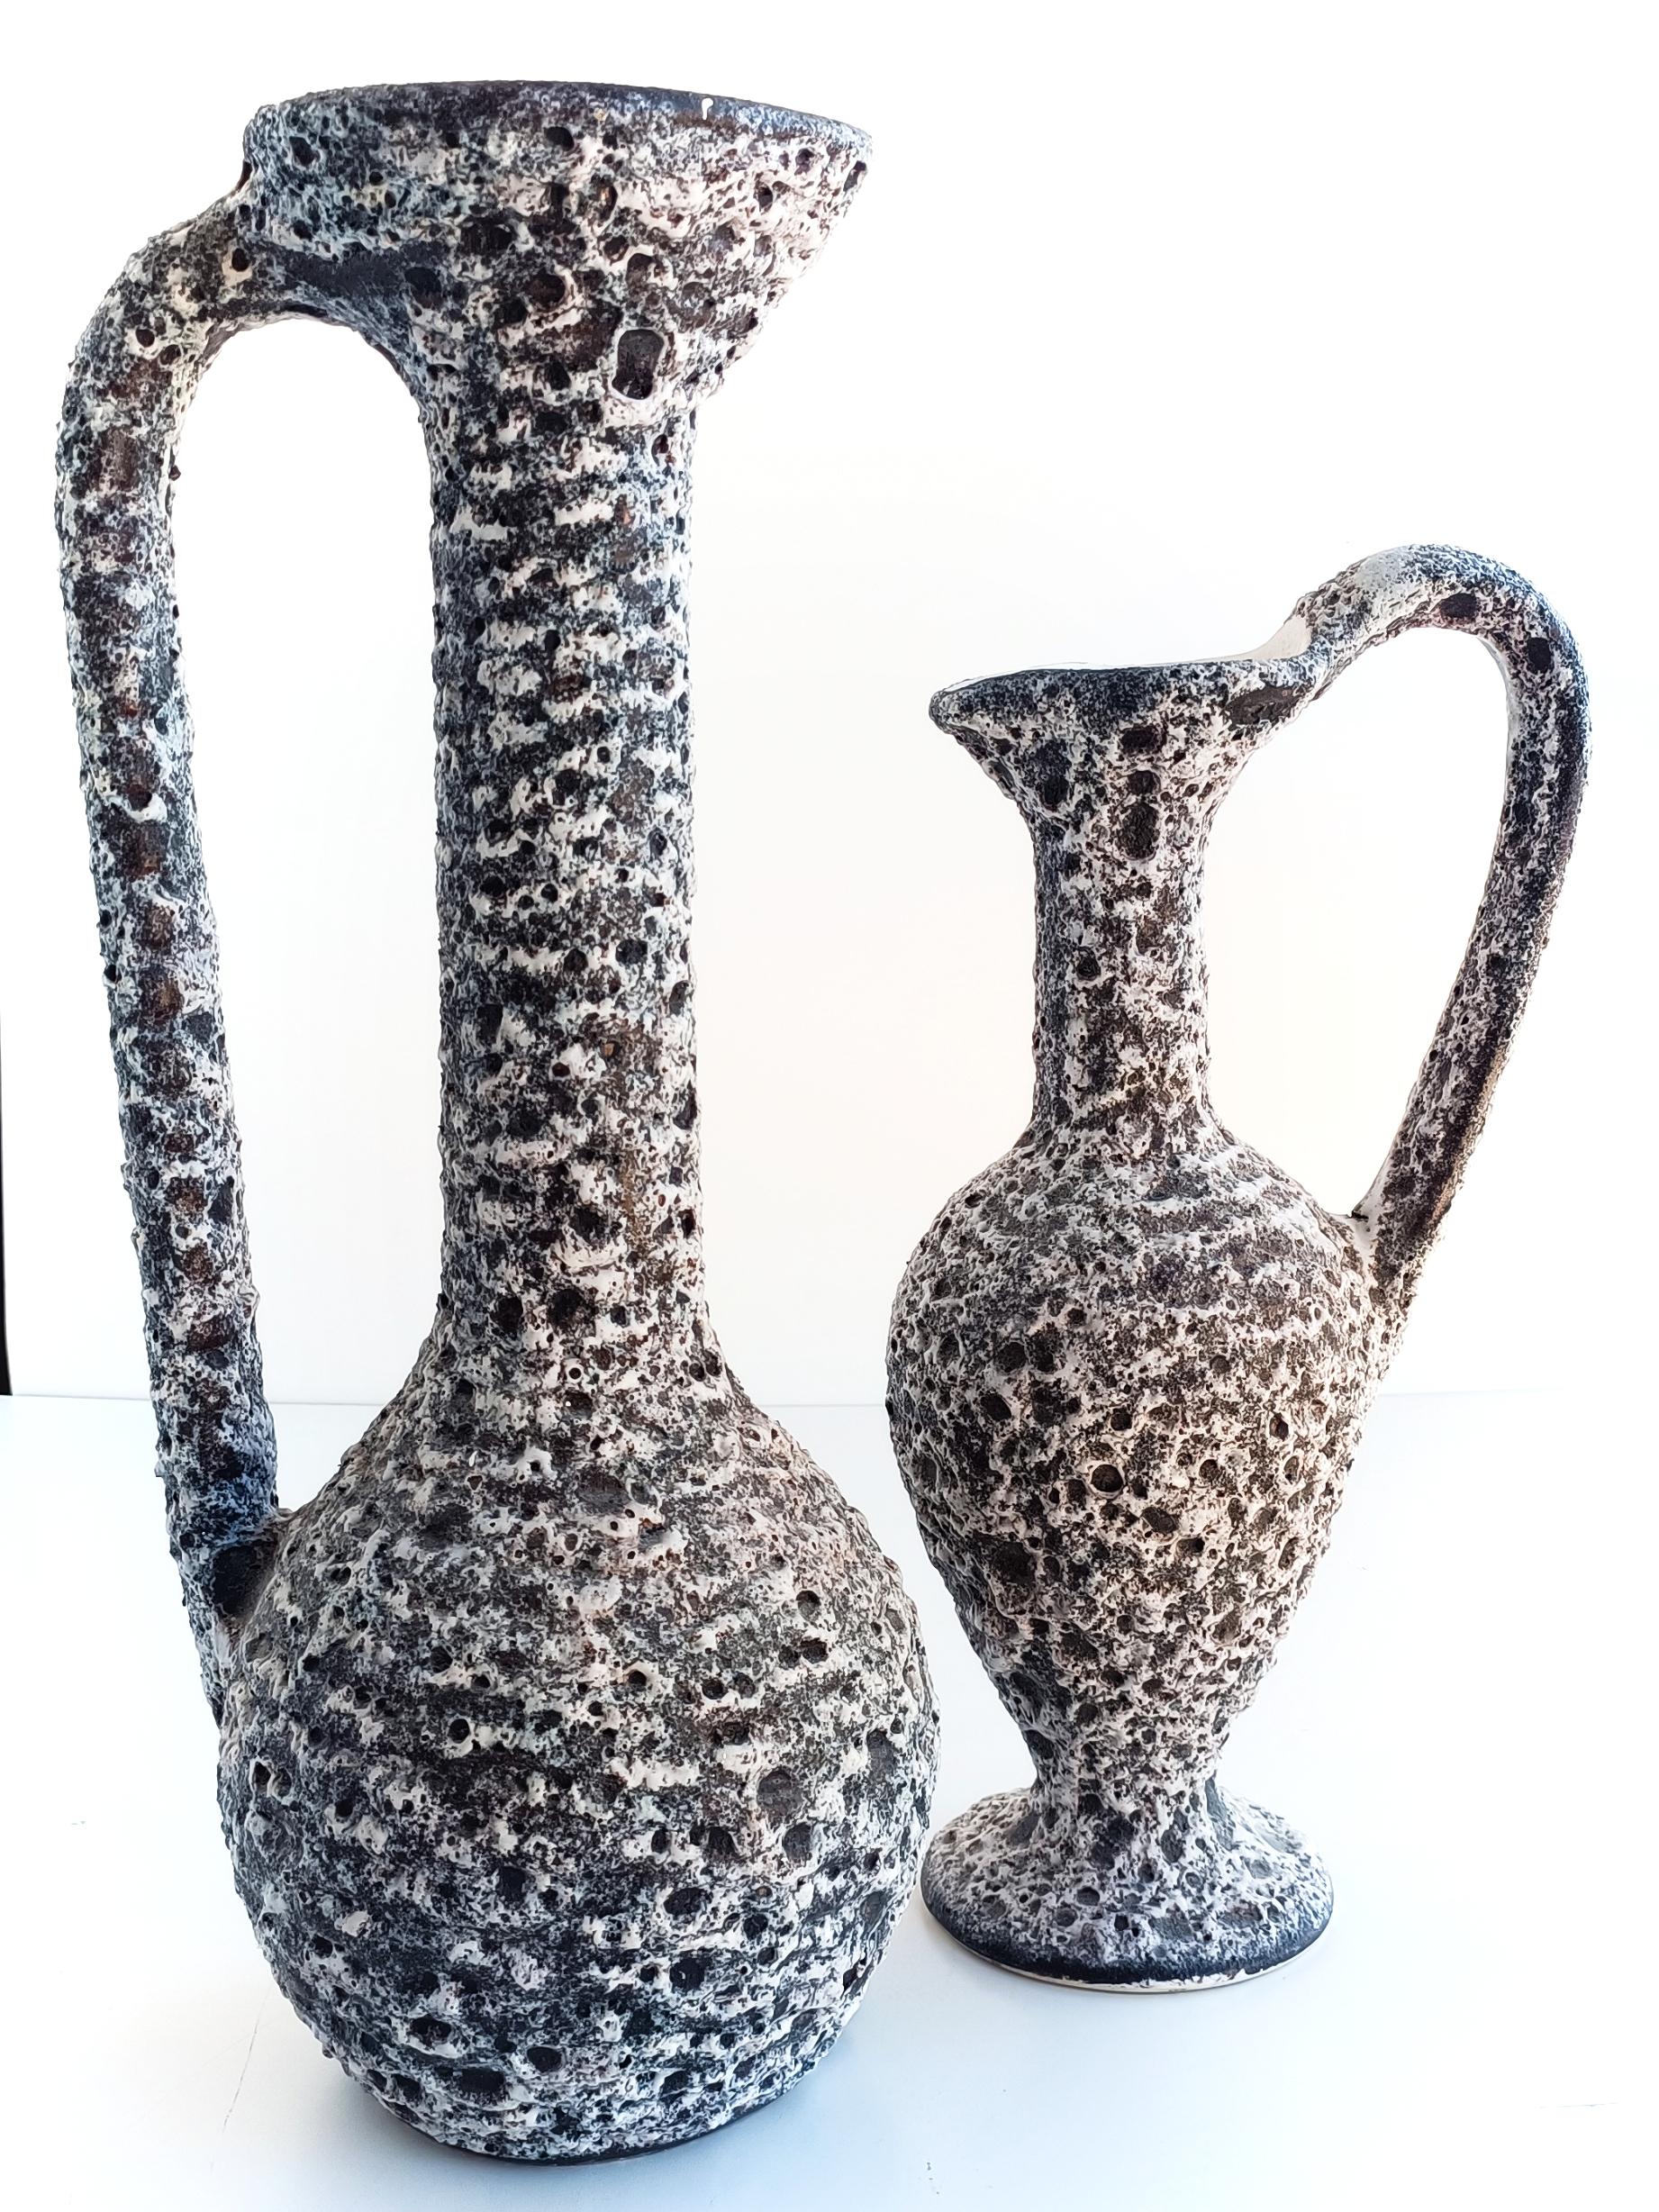 Vintage French Vallauris Set of Two Ceramic Pitchers Signed Alain Rufas, 1960s For Sale 3